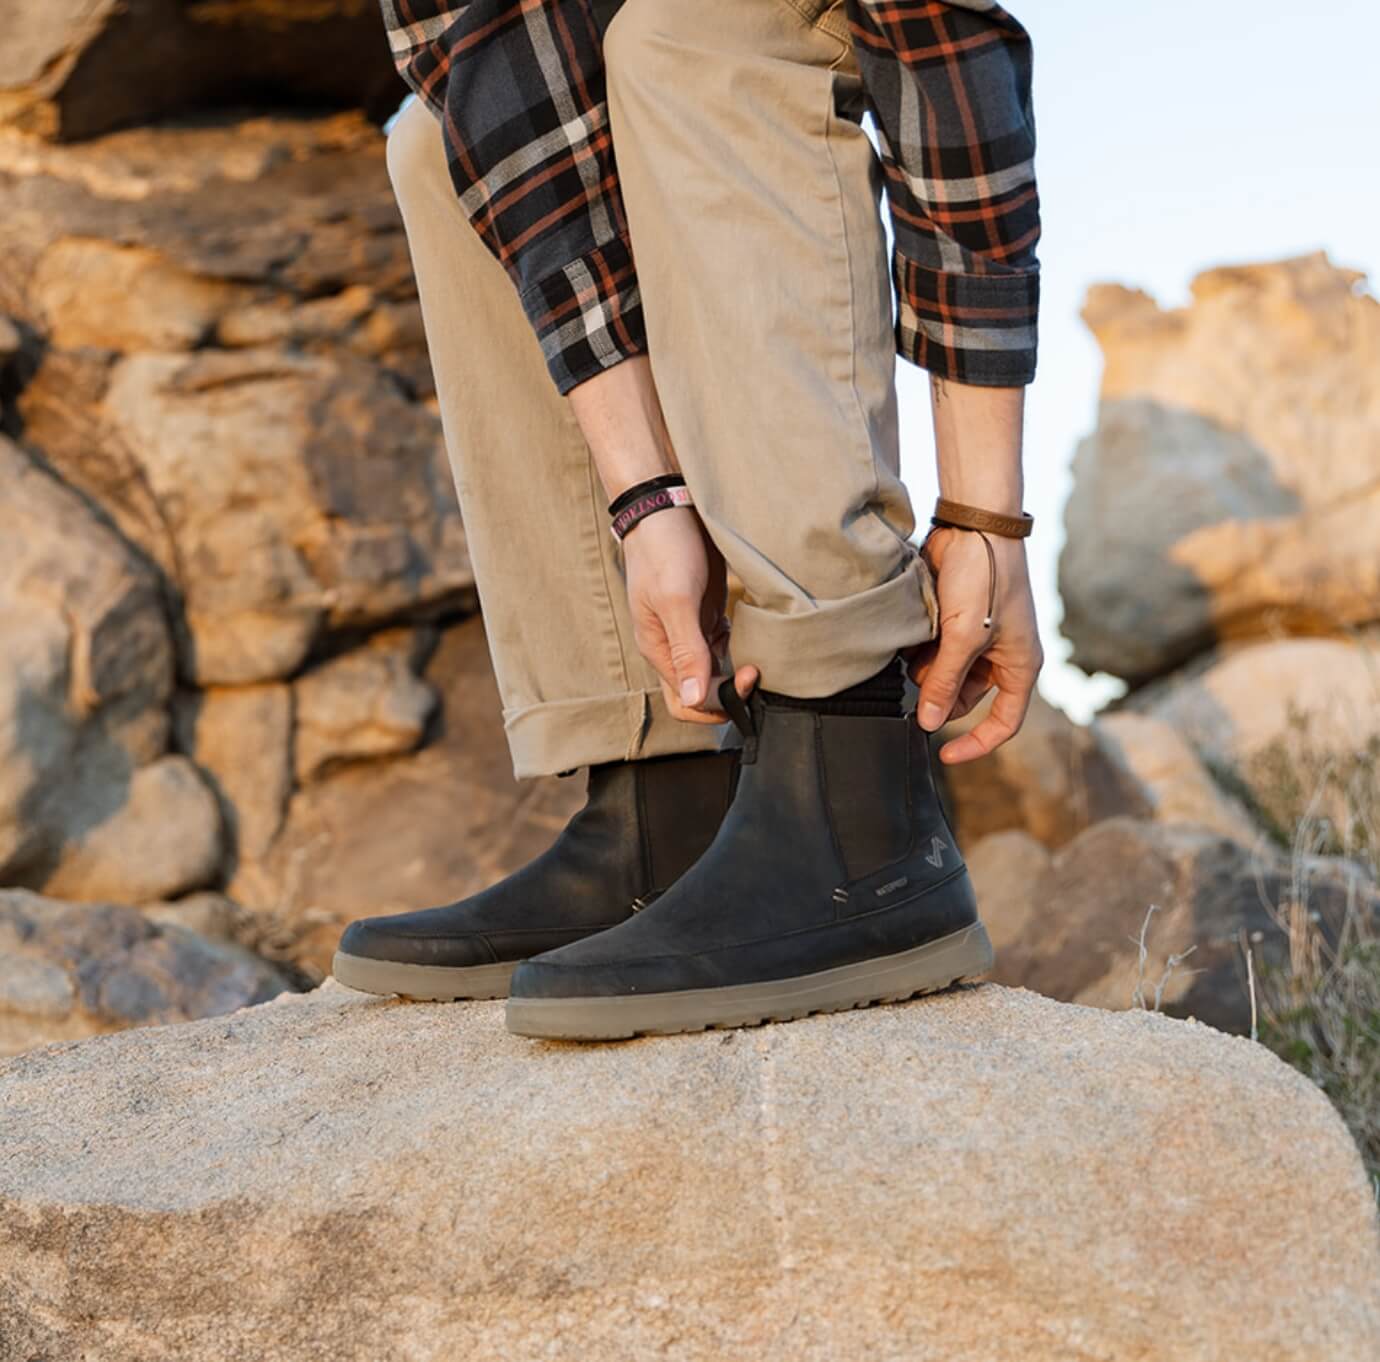 Click to shop Forsake Women's styles. Image features the Lucie Mid in black/olive.